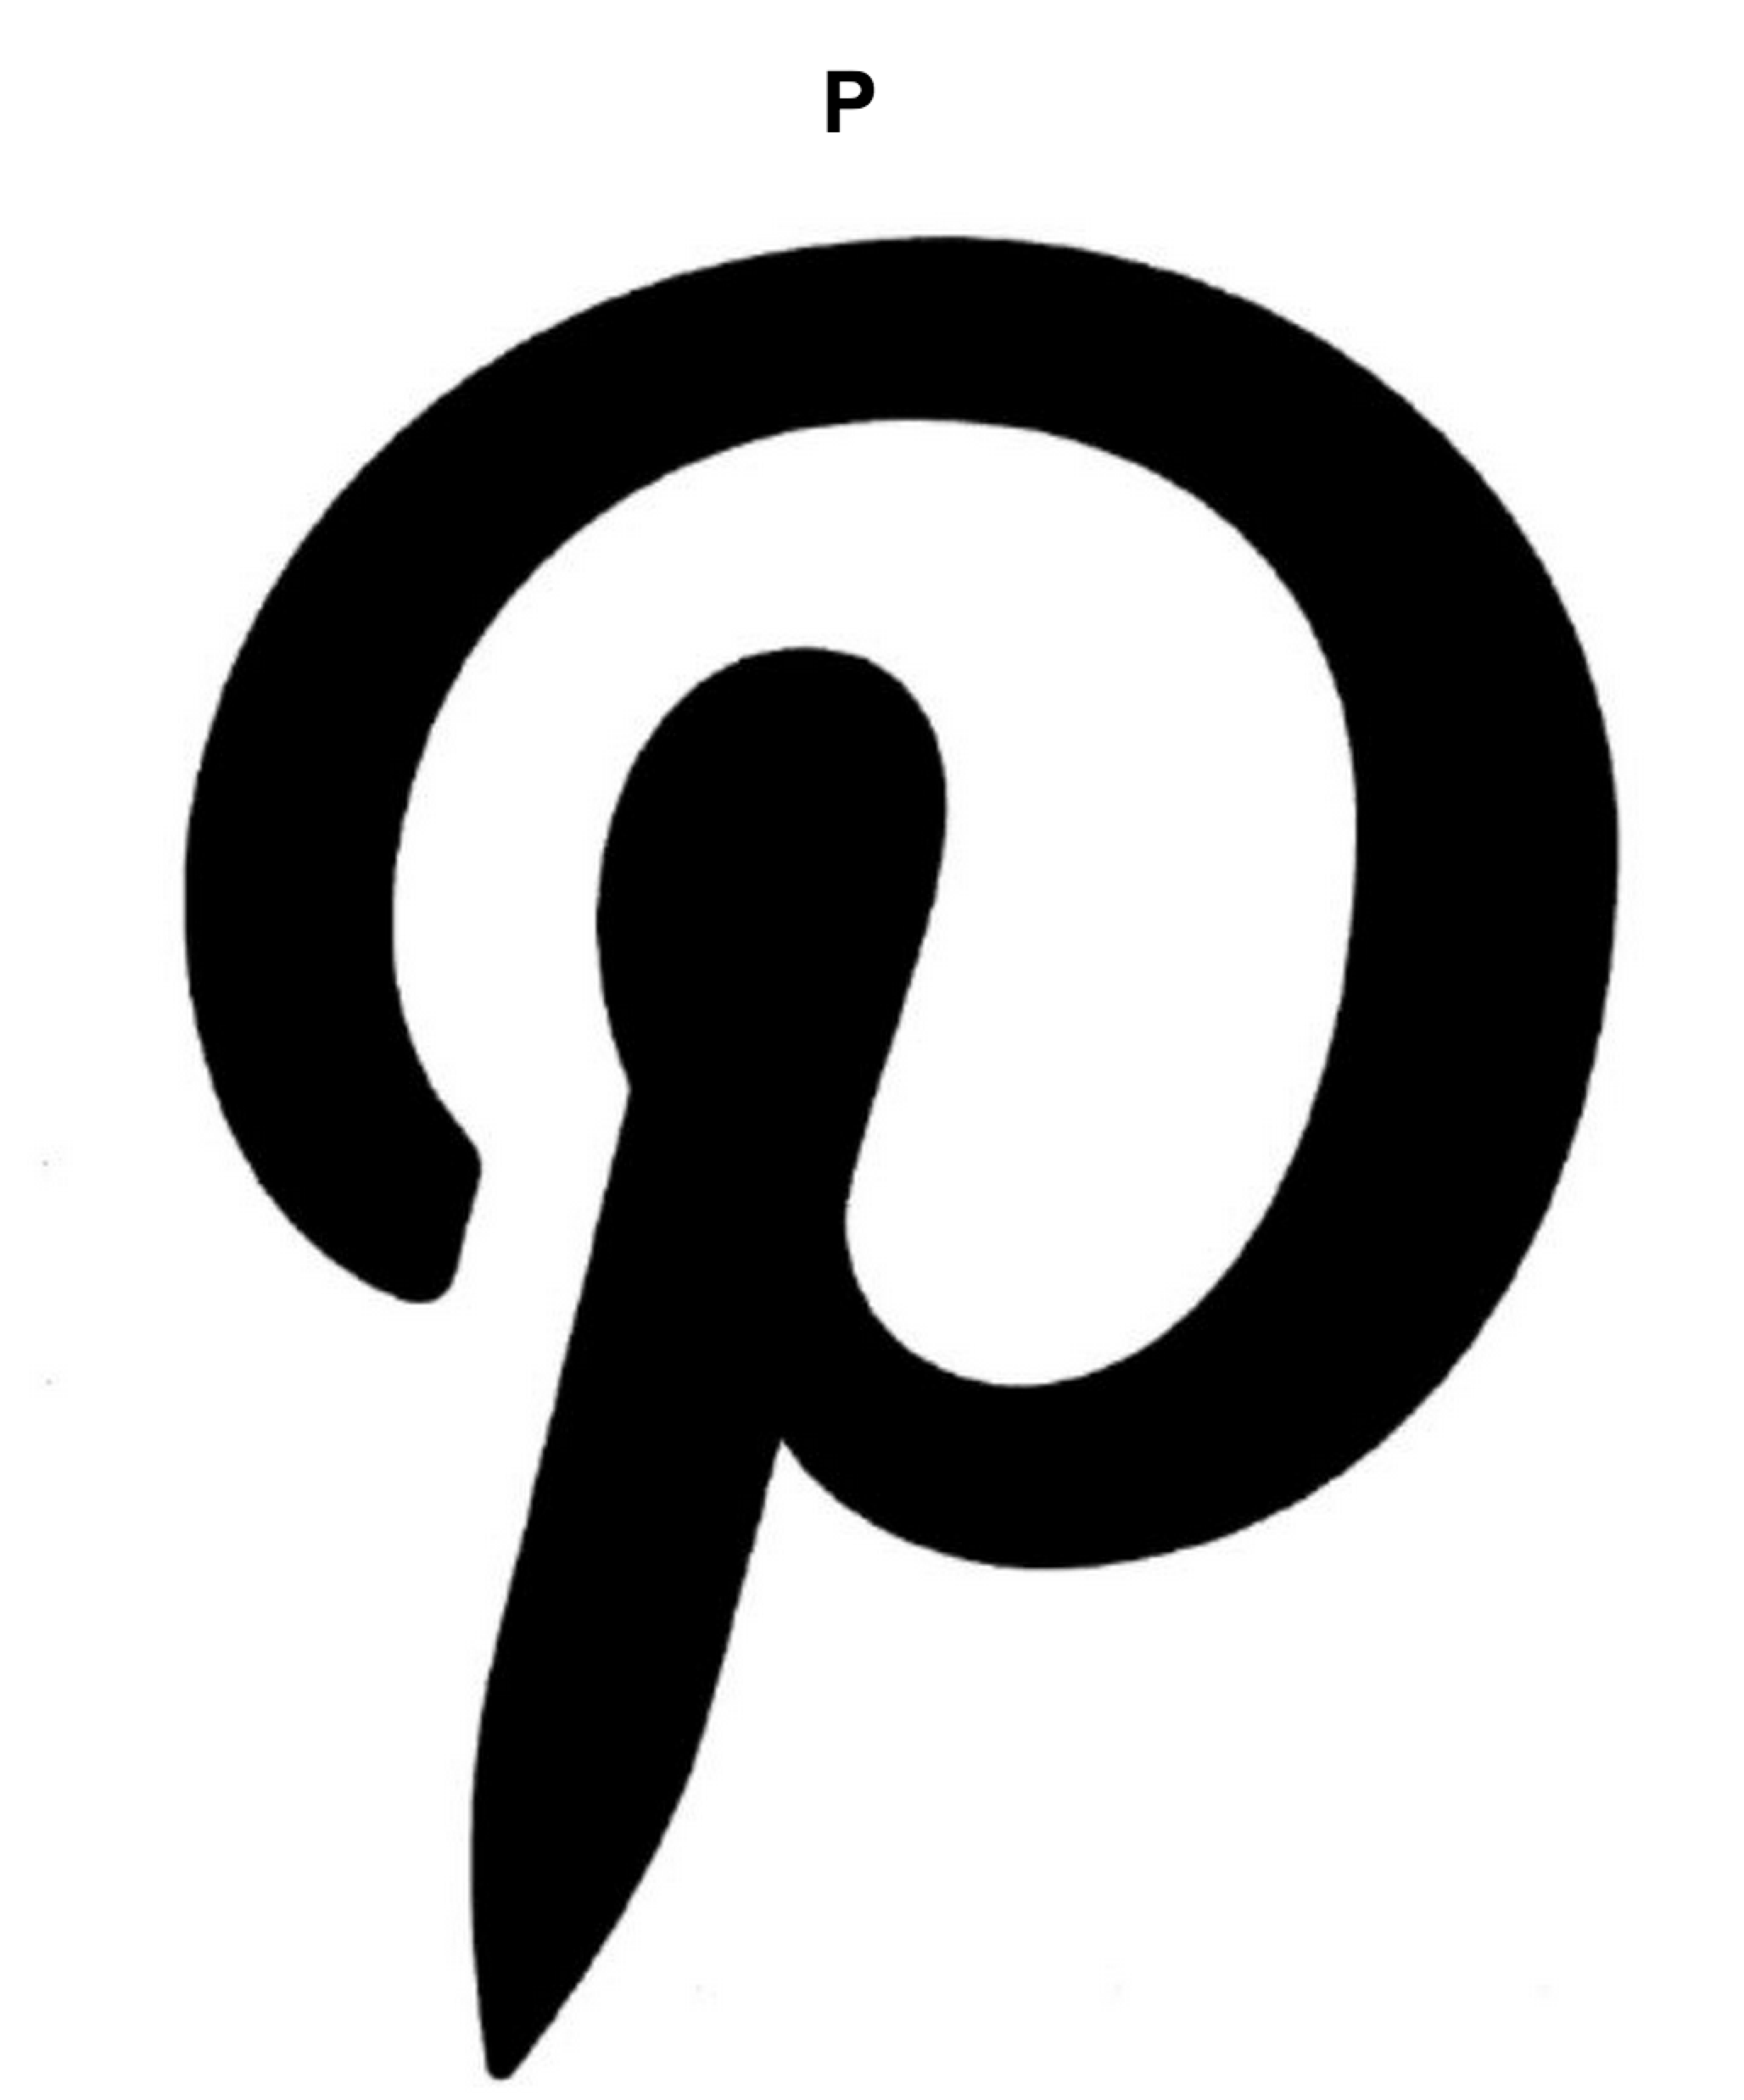 Pinterest And Path To Battle Over Letter “P” Logo Trademark ...